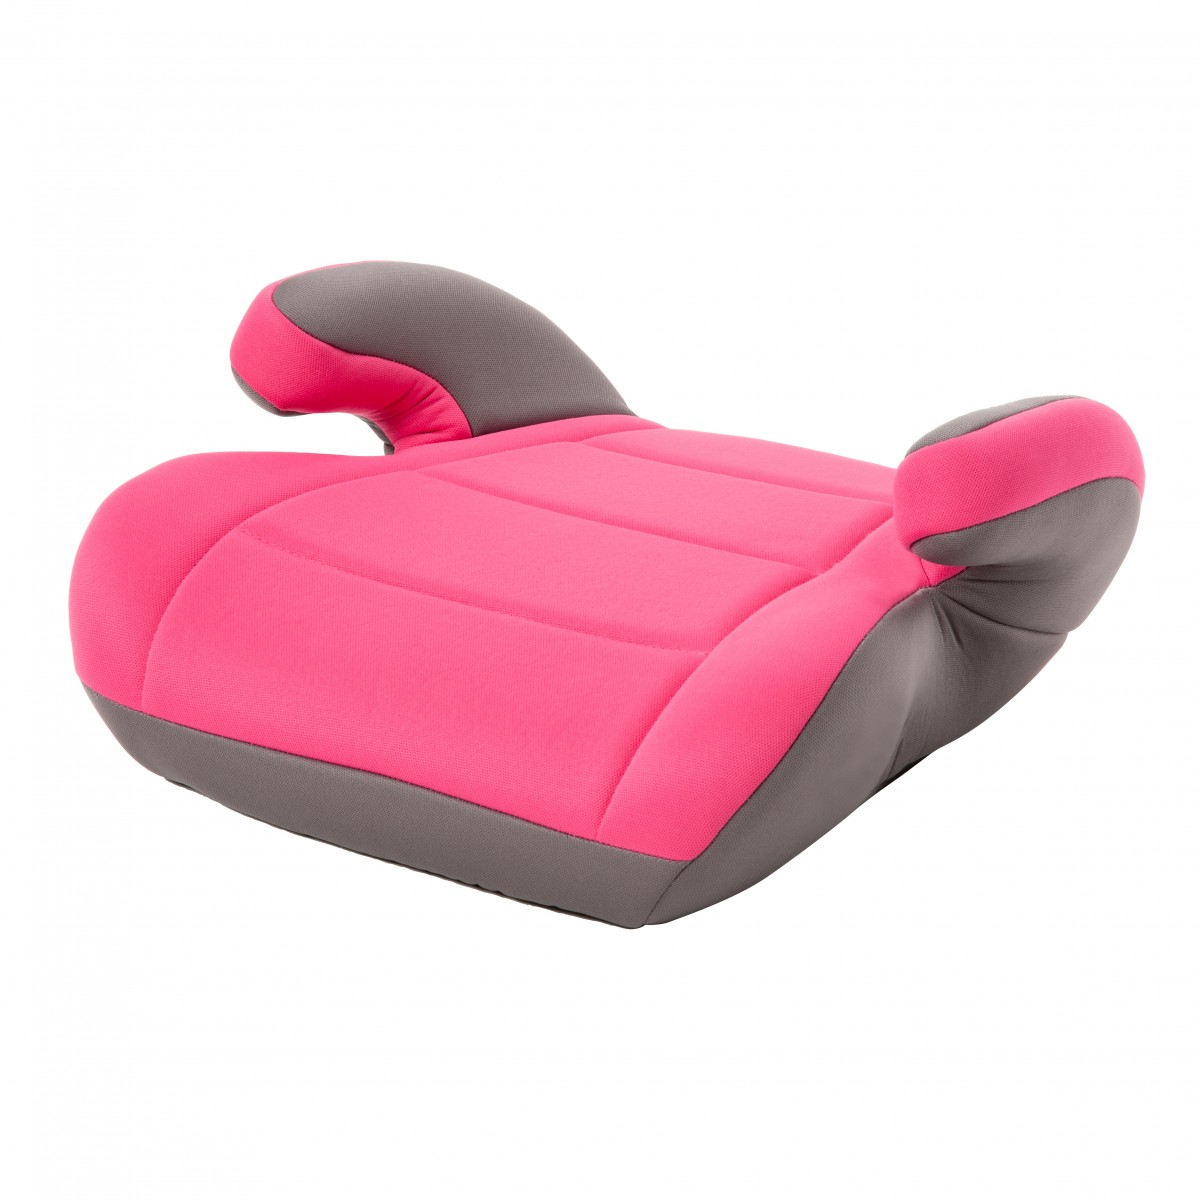 https://thecarseatlady.com/wp-content/uploads/2014/04/cosco-topside-pink.jpg